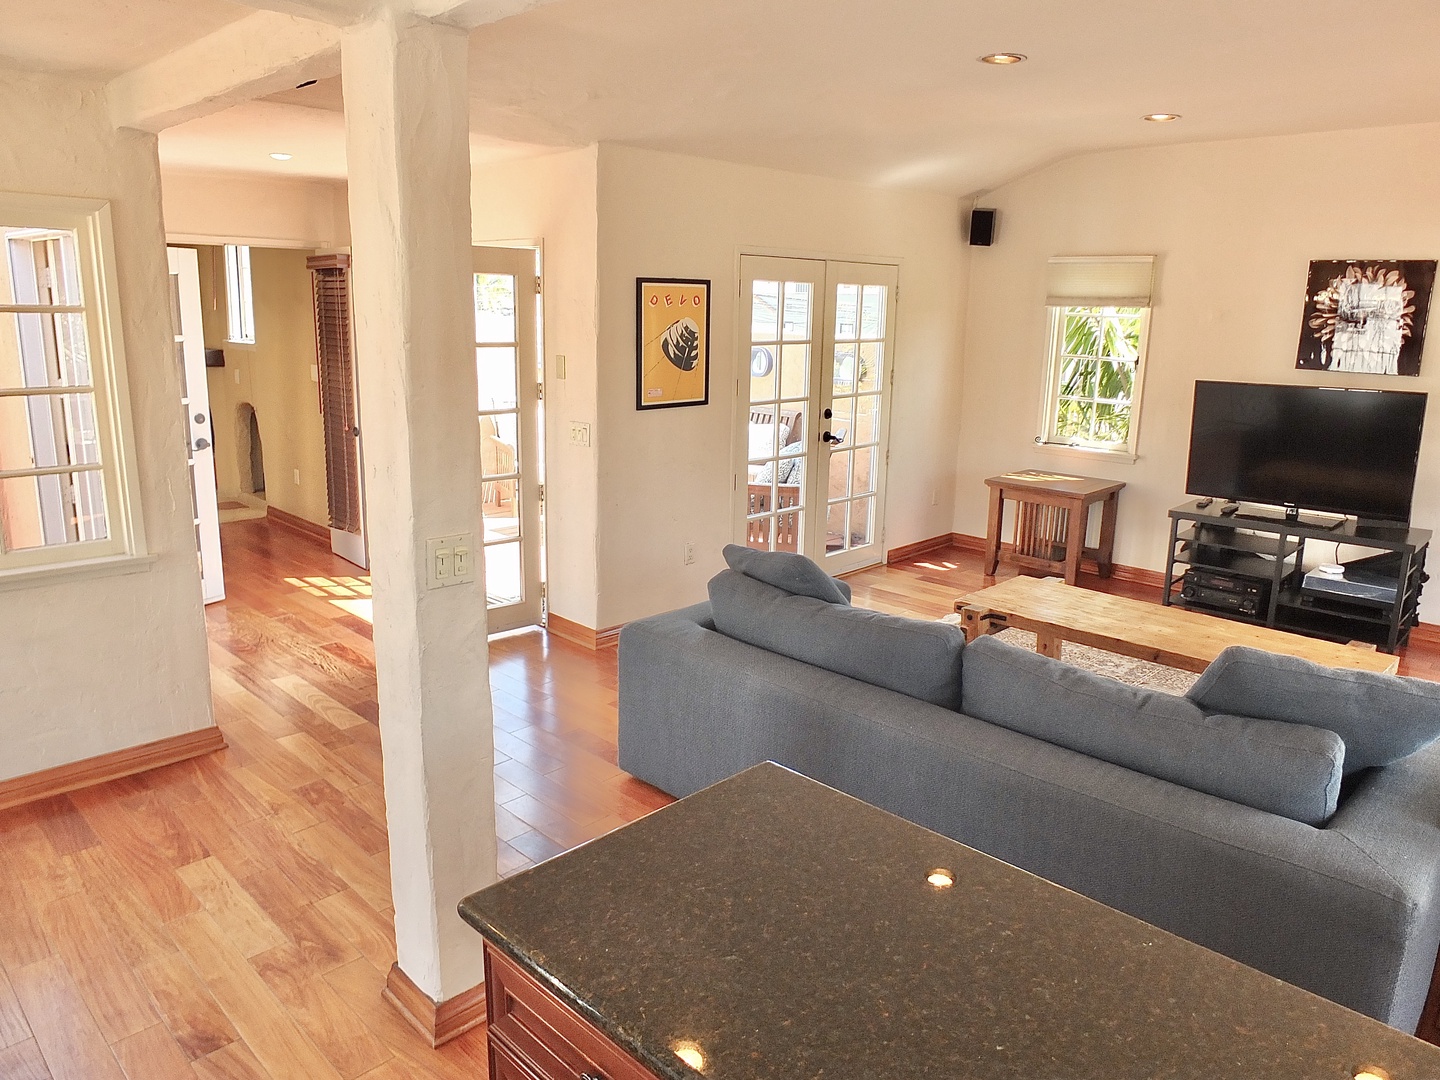 Head upstairs to the 2nd floor lounge area, boasting a separate kitchenette and space to relax